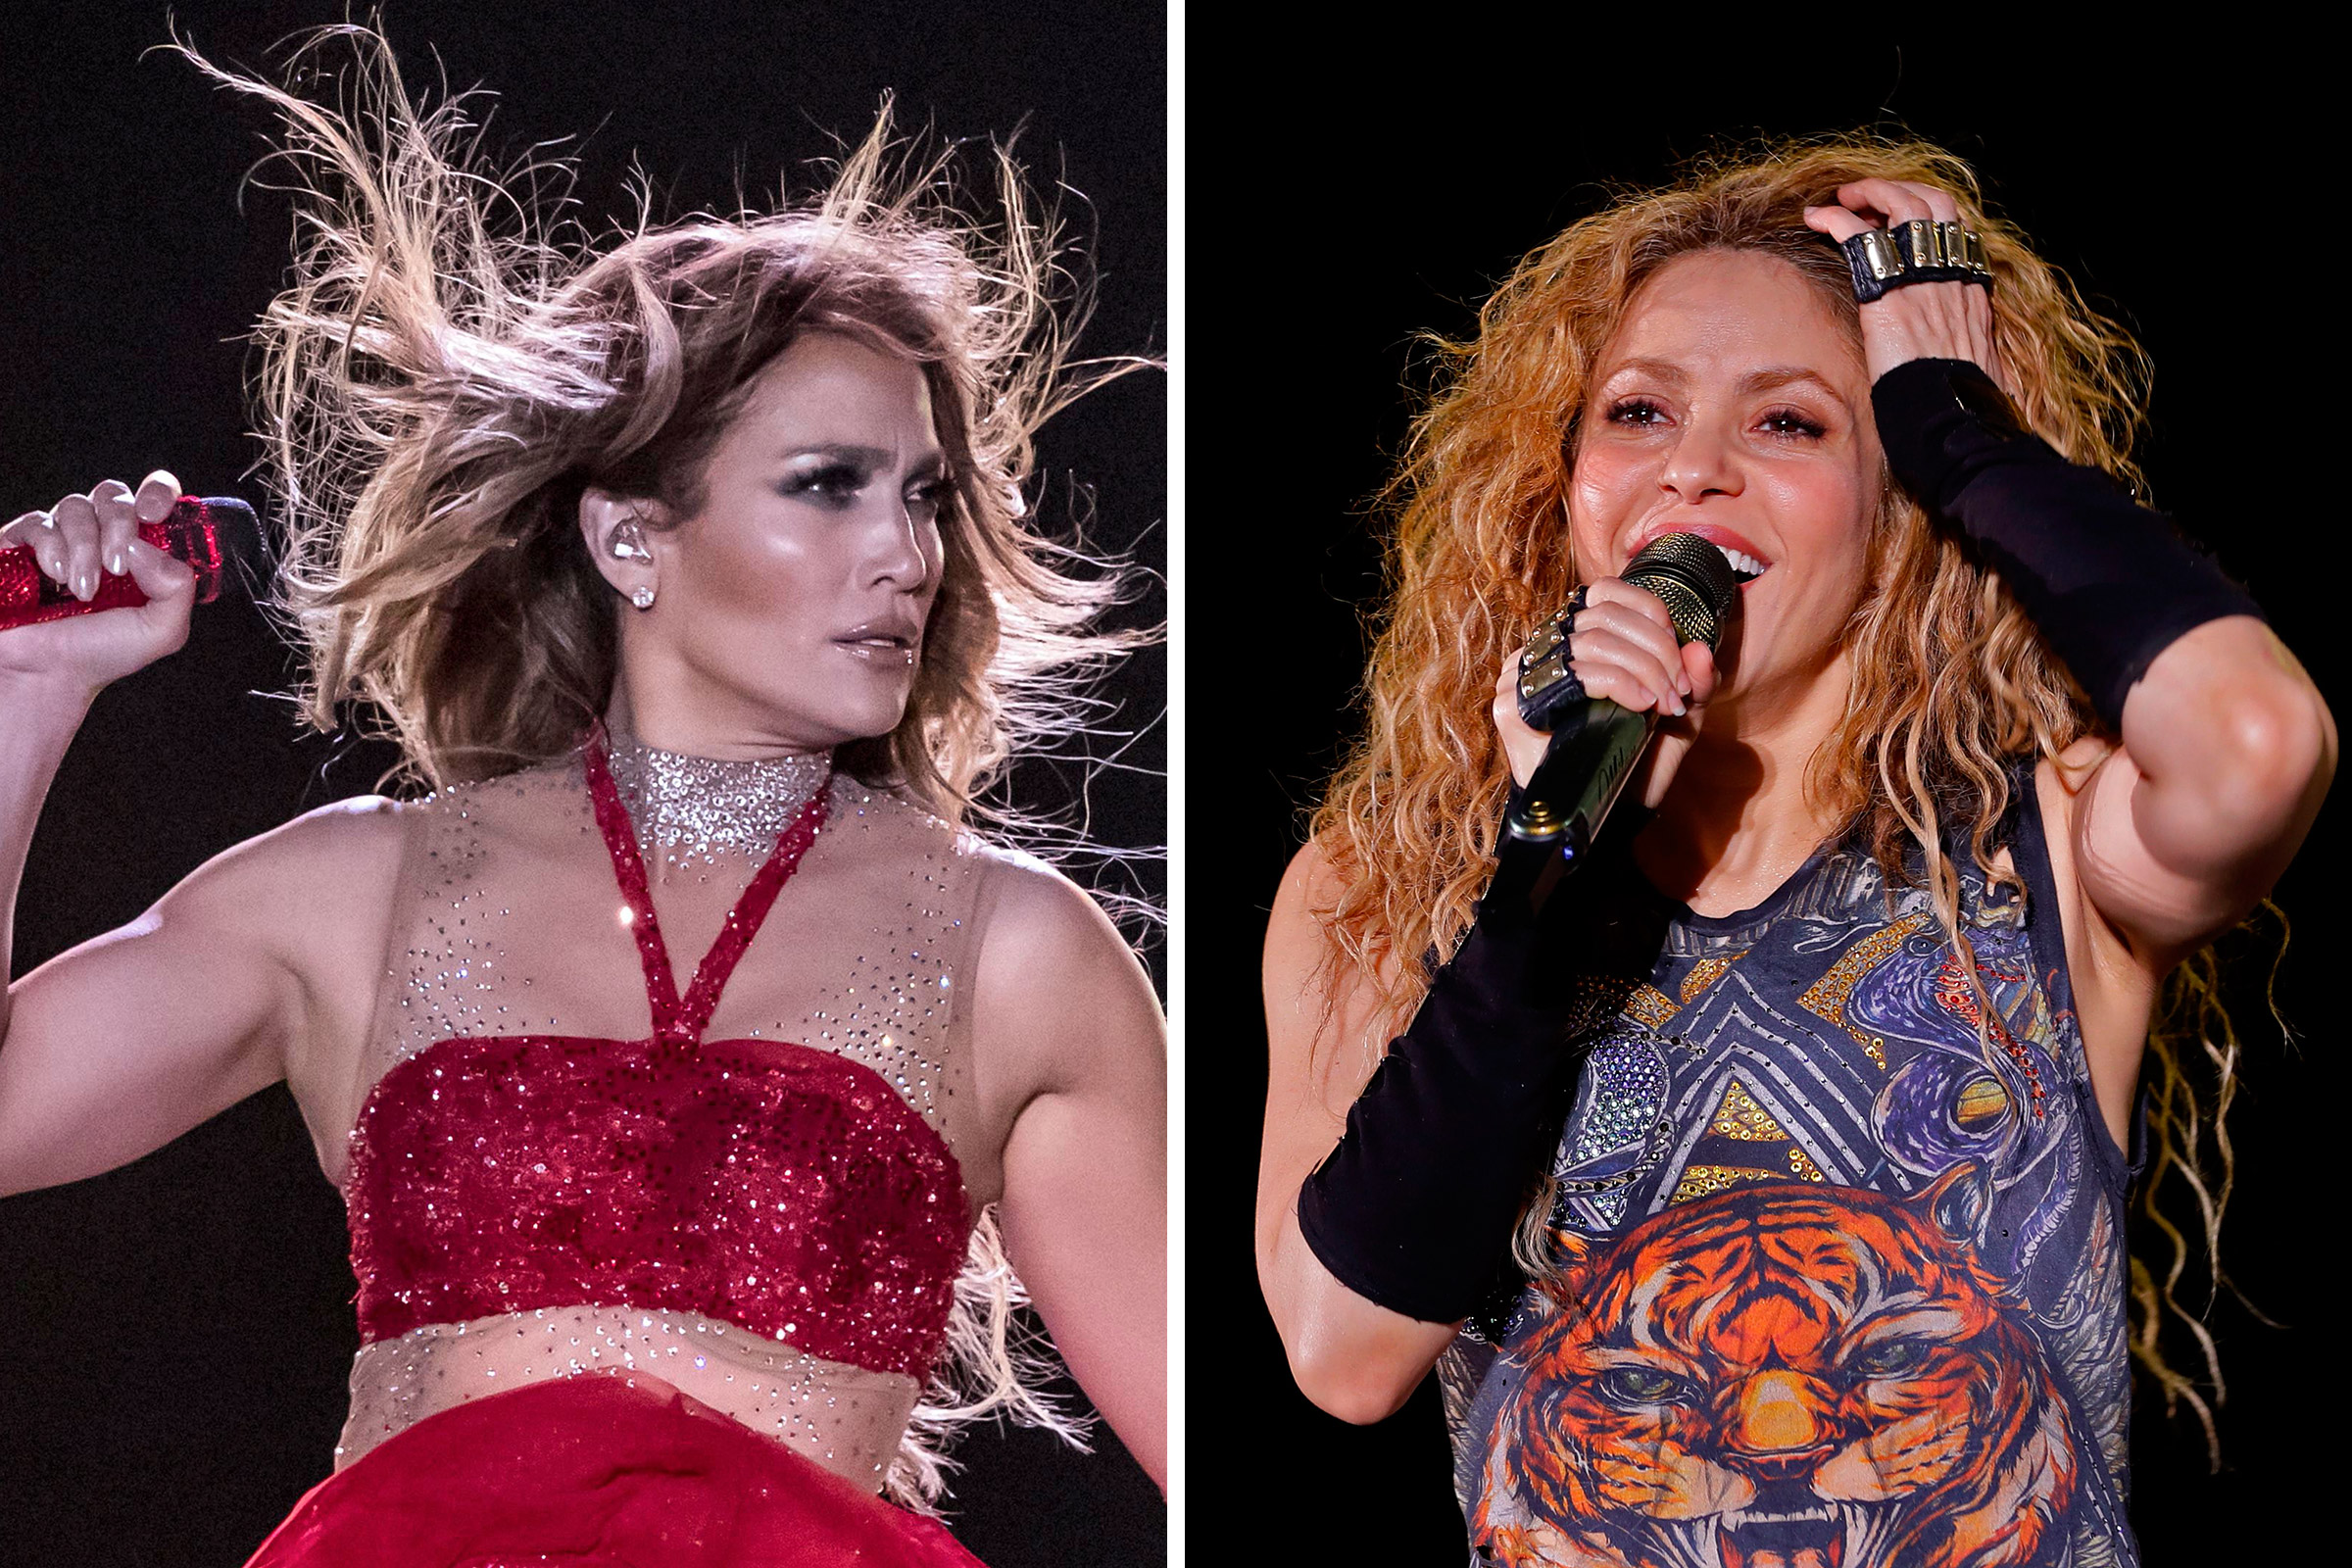 Jennifer Lopez and Shakira will headline the 2020 Super Bowl Halftime Show, they confirmed on Thursday, Sept. 26, 2019. (Getty Images (2))